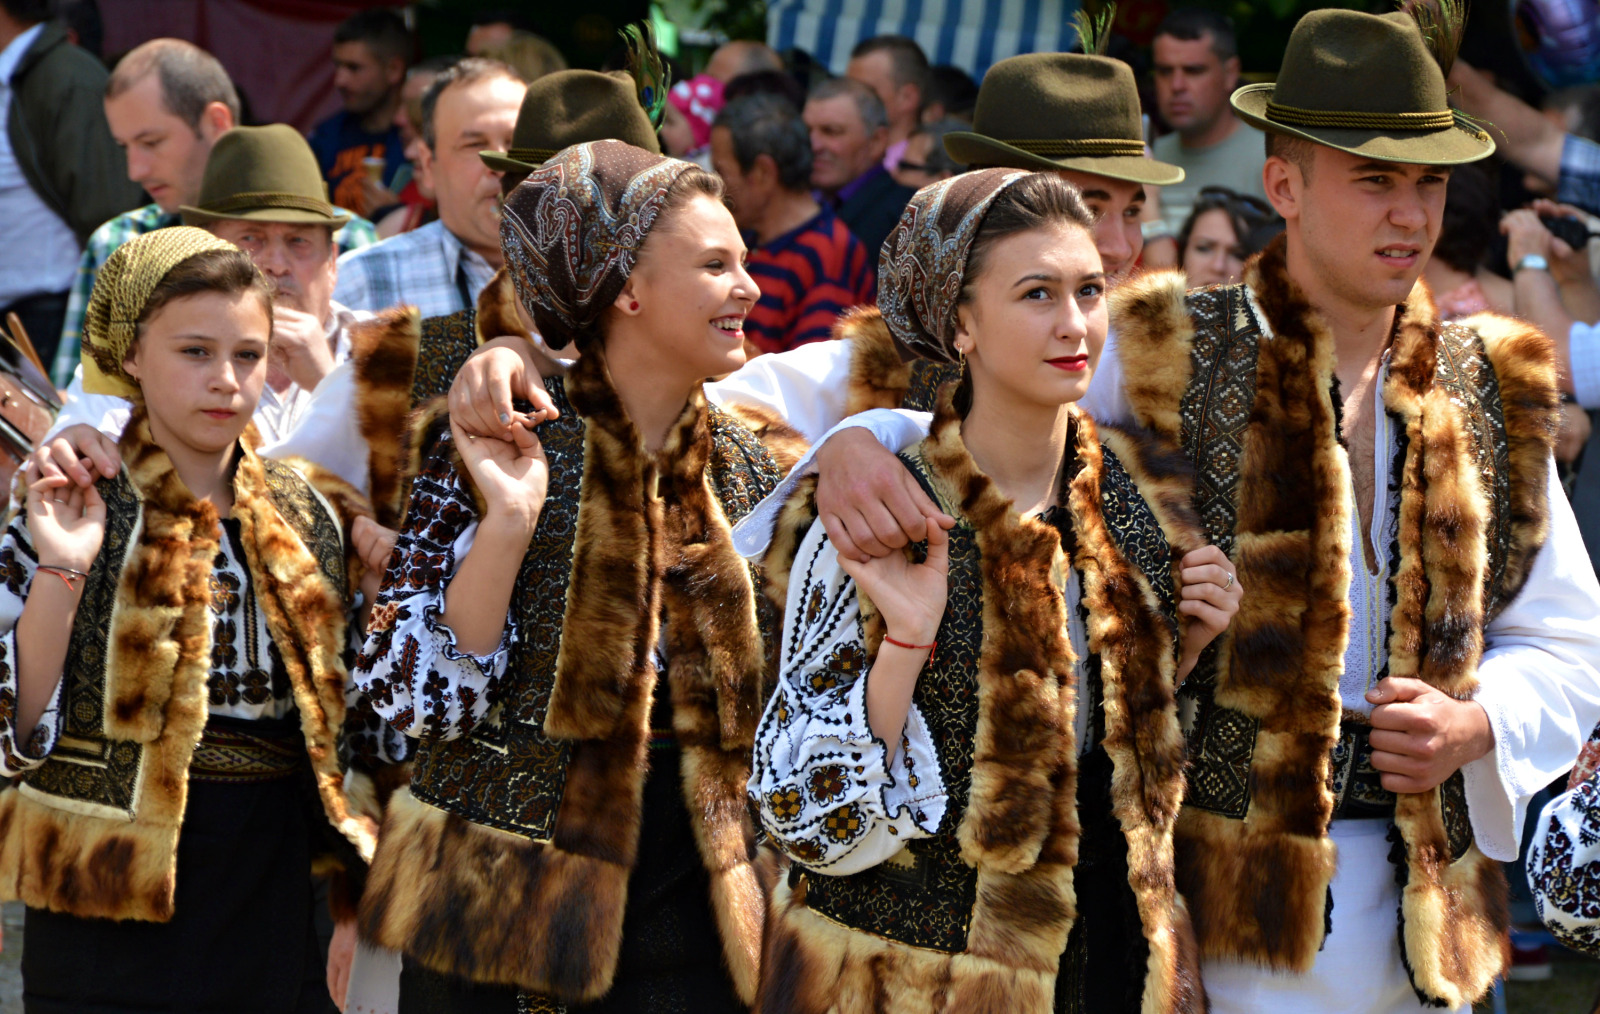 File:Romanian teens in traditional clothes are dancing.jpg - Wikipedia